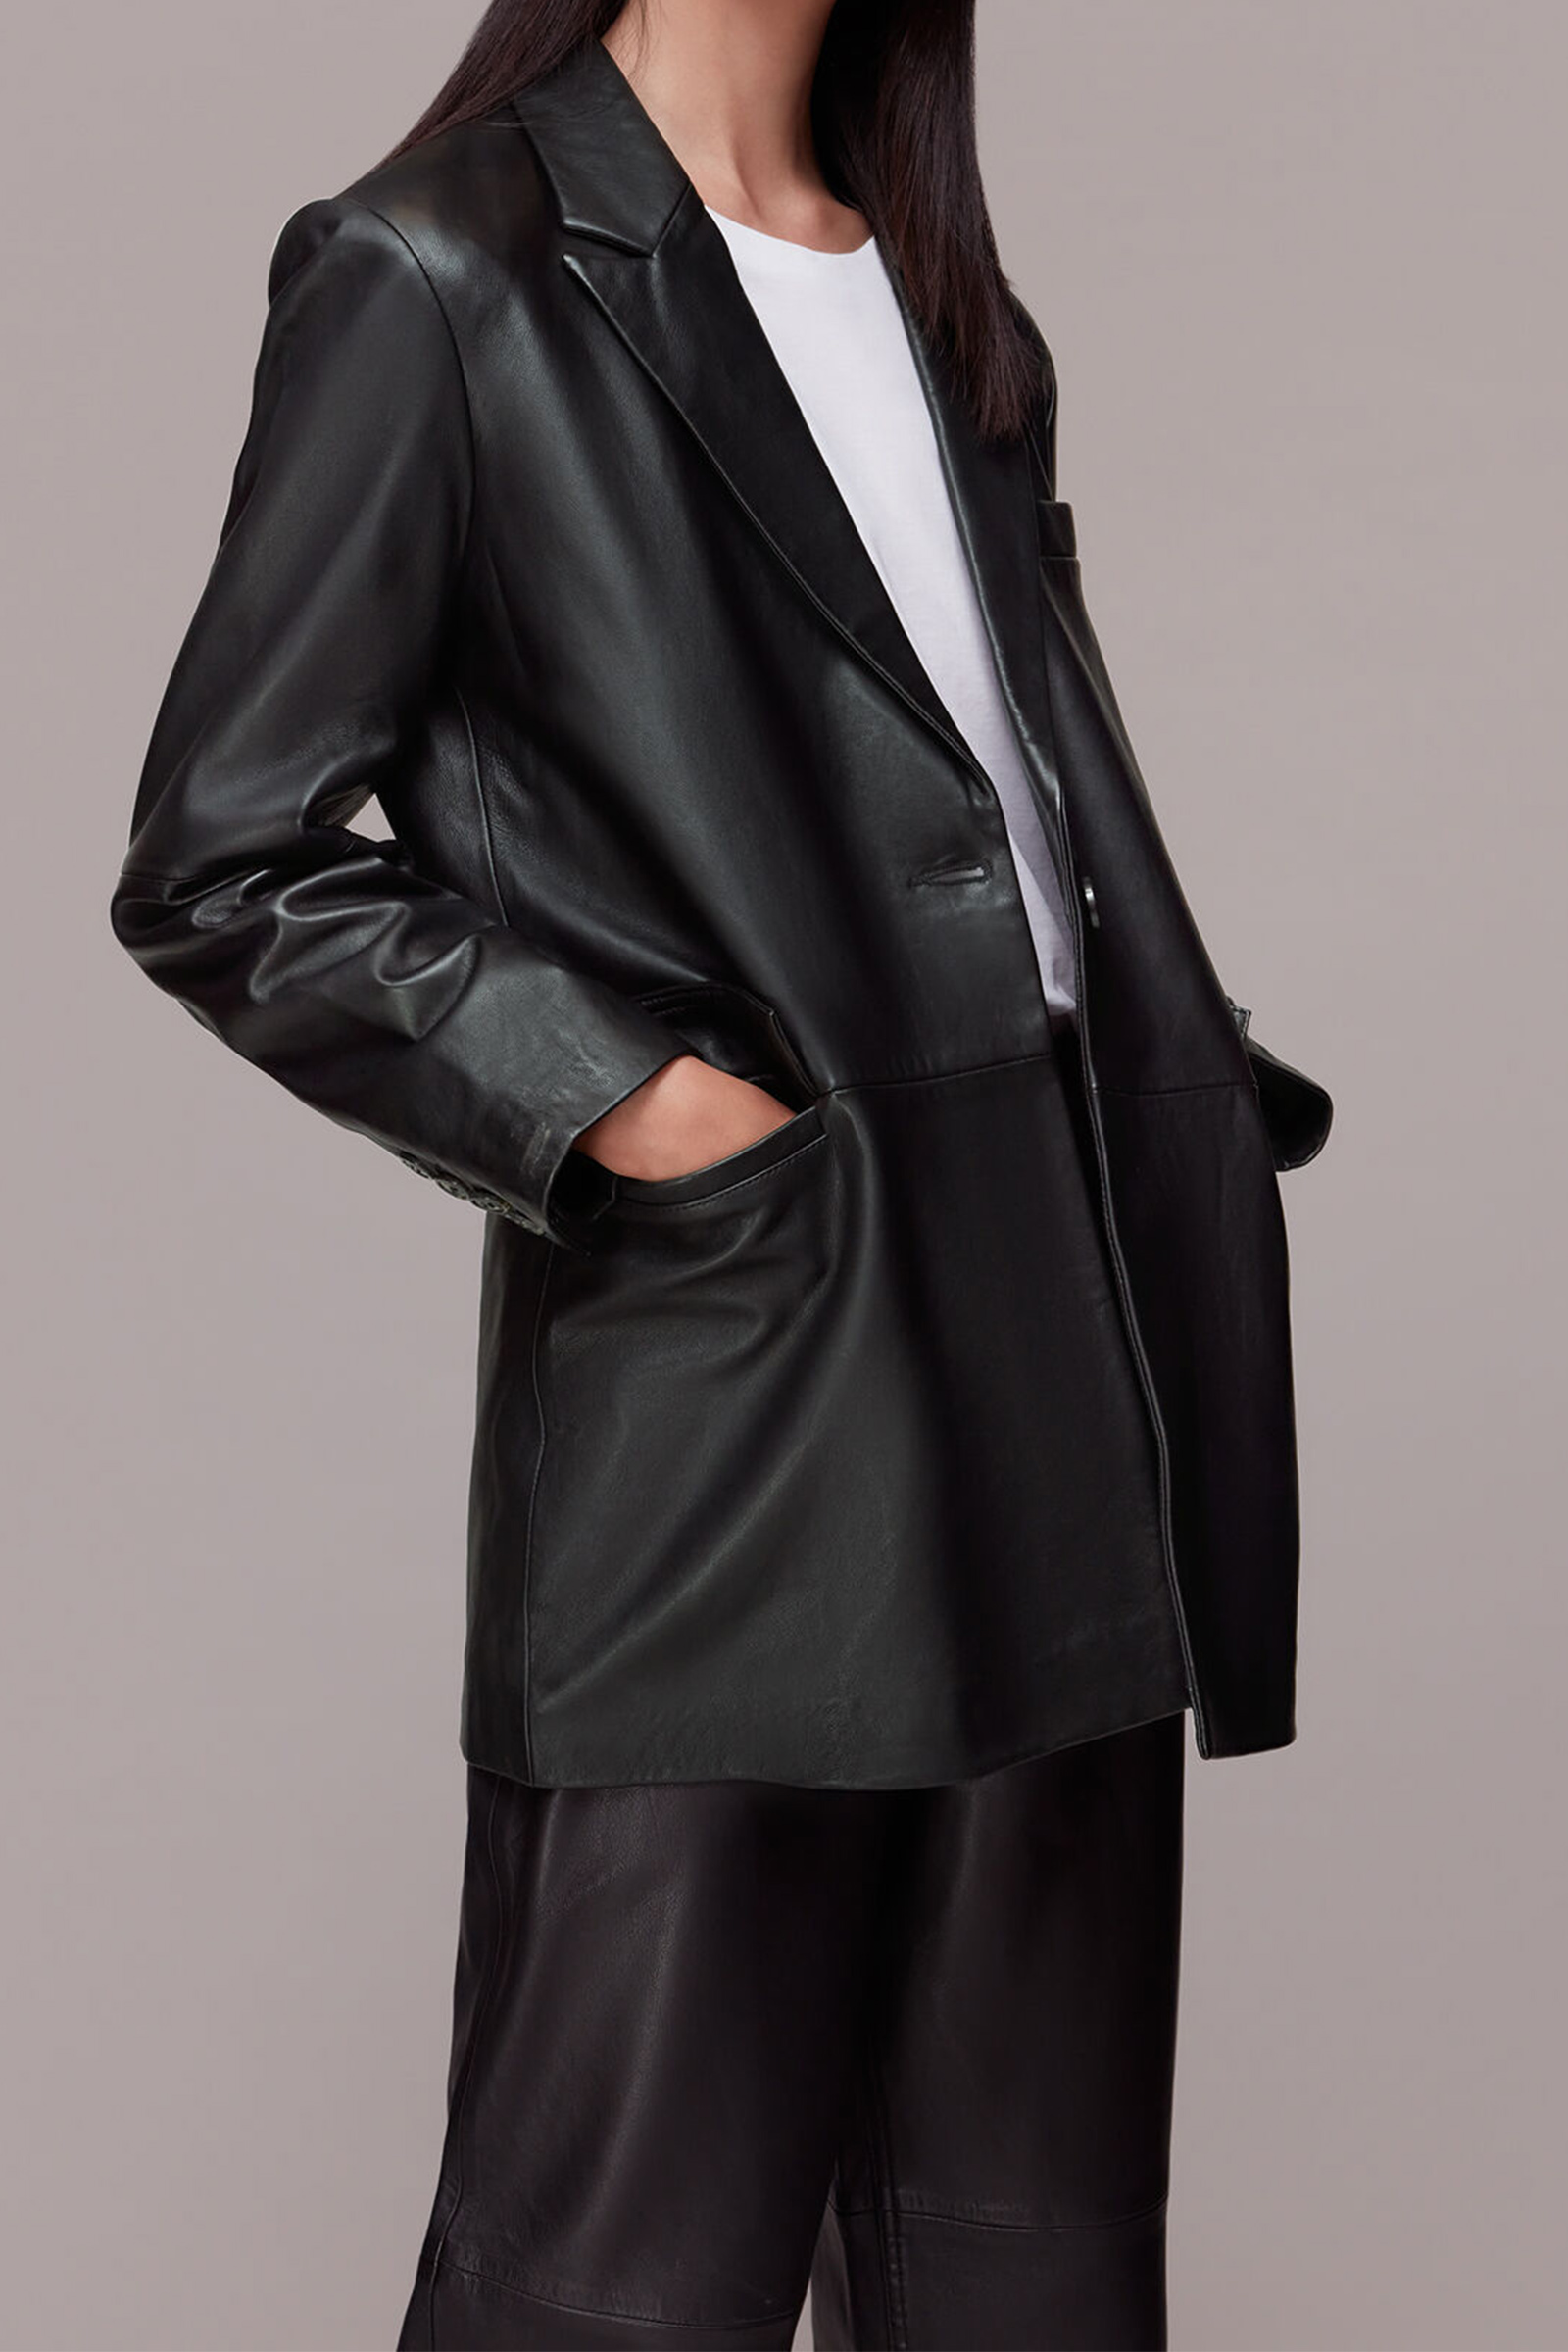 How to Style a Leather Blazer in 2022 Like a Total Style Icon